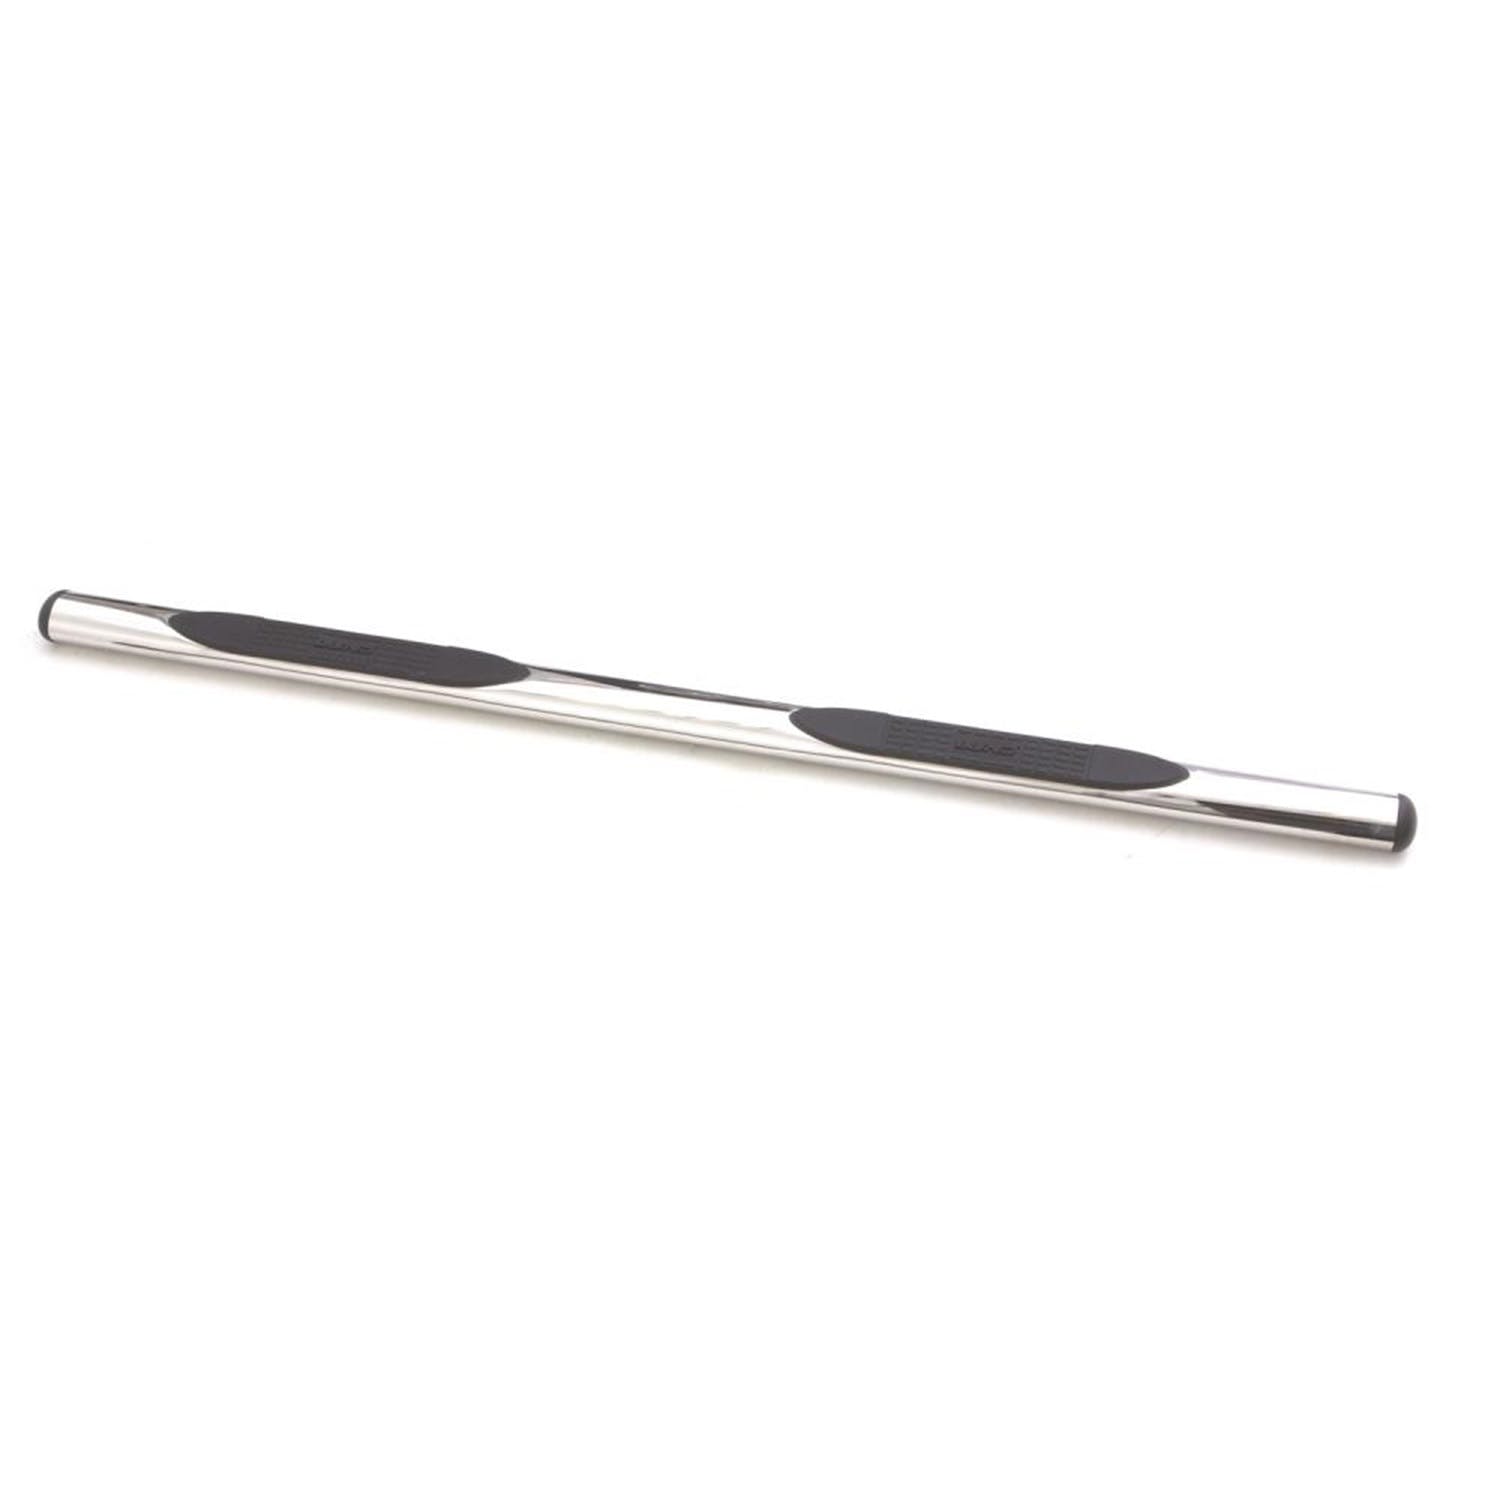 LUND 23678333 4 Inch Oval Straight Nerf Bar - Black 4 In OVAL STRAIGHT STEEL